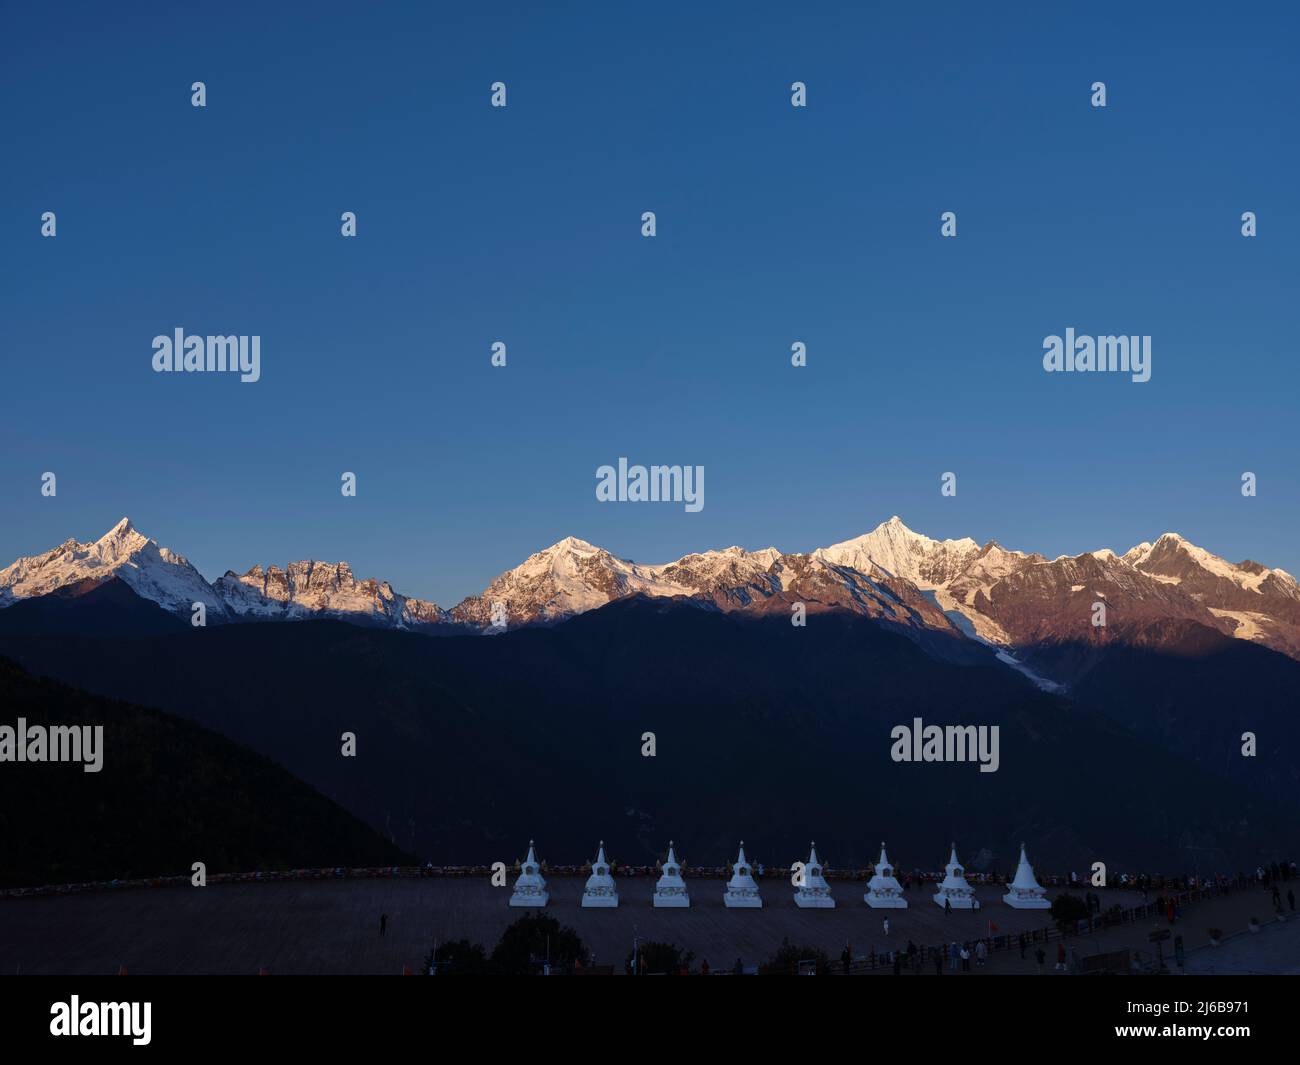 white pagodas of feilai temple with meili snow mountain at sunrise in background in china's yunnan province Stock Photo